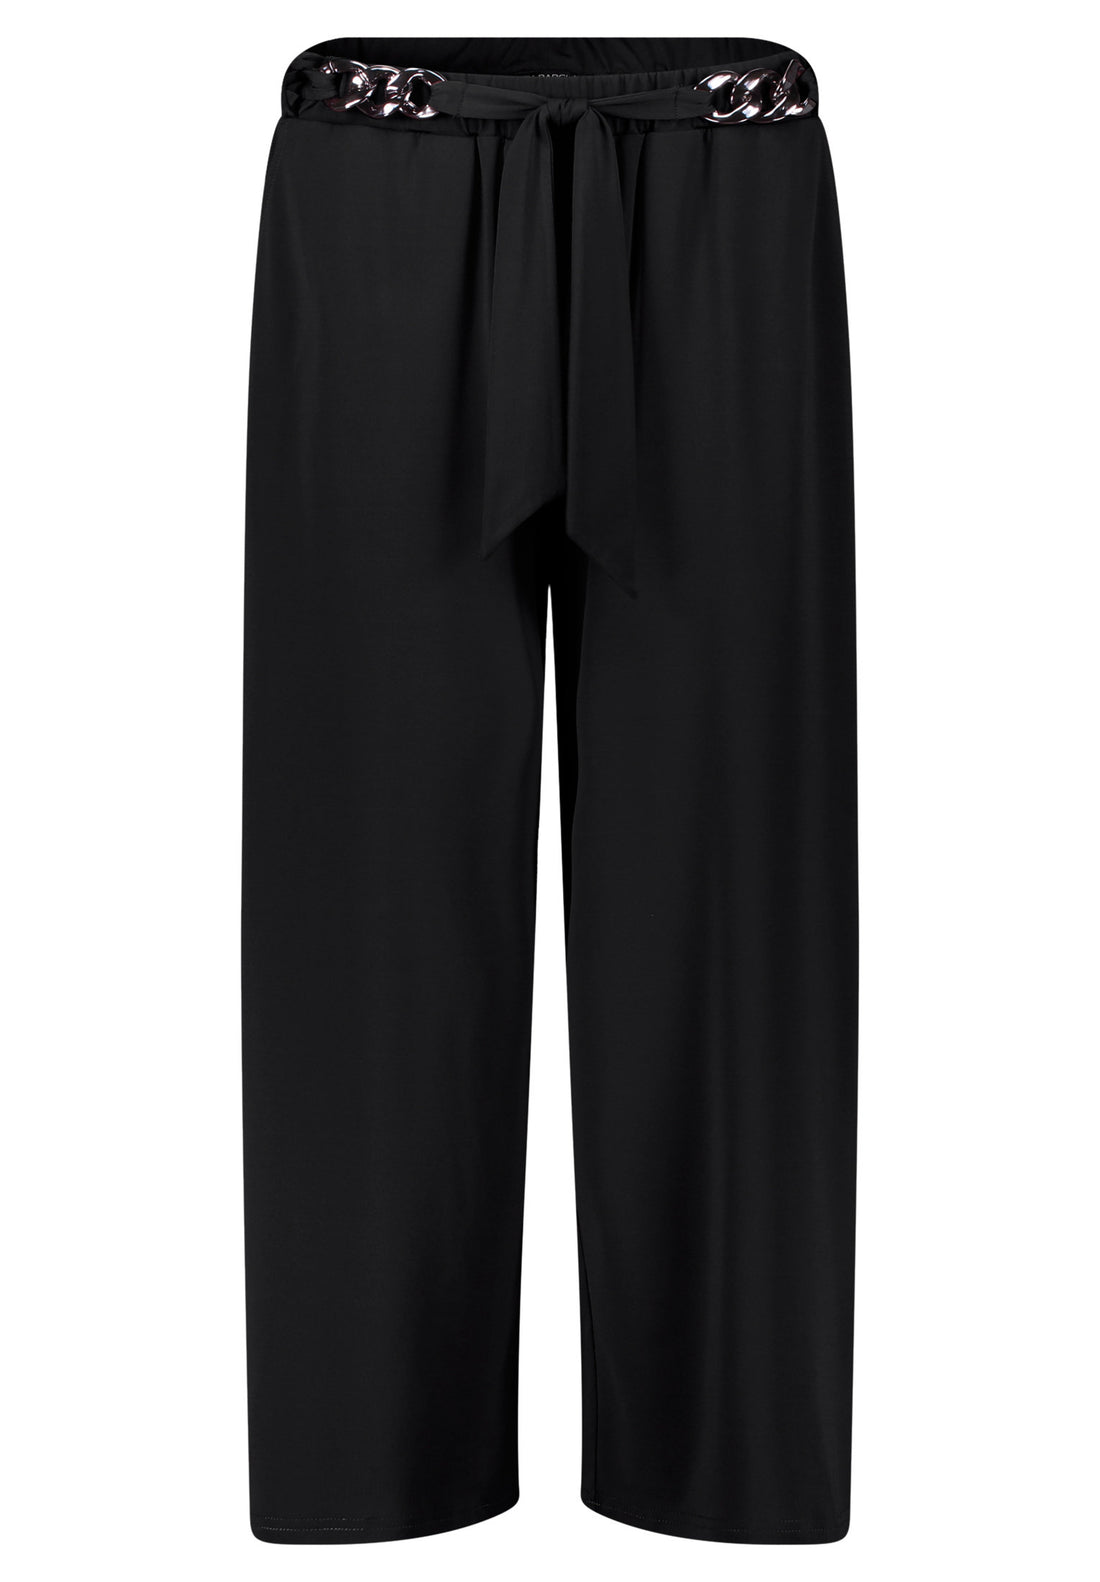 Culottes With Elastic Waistband_6808-1217_9045_01